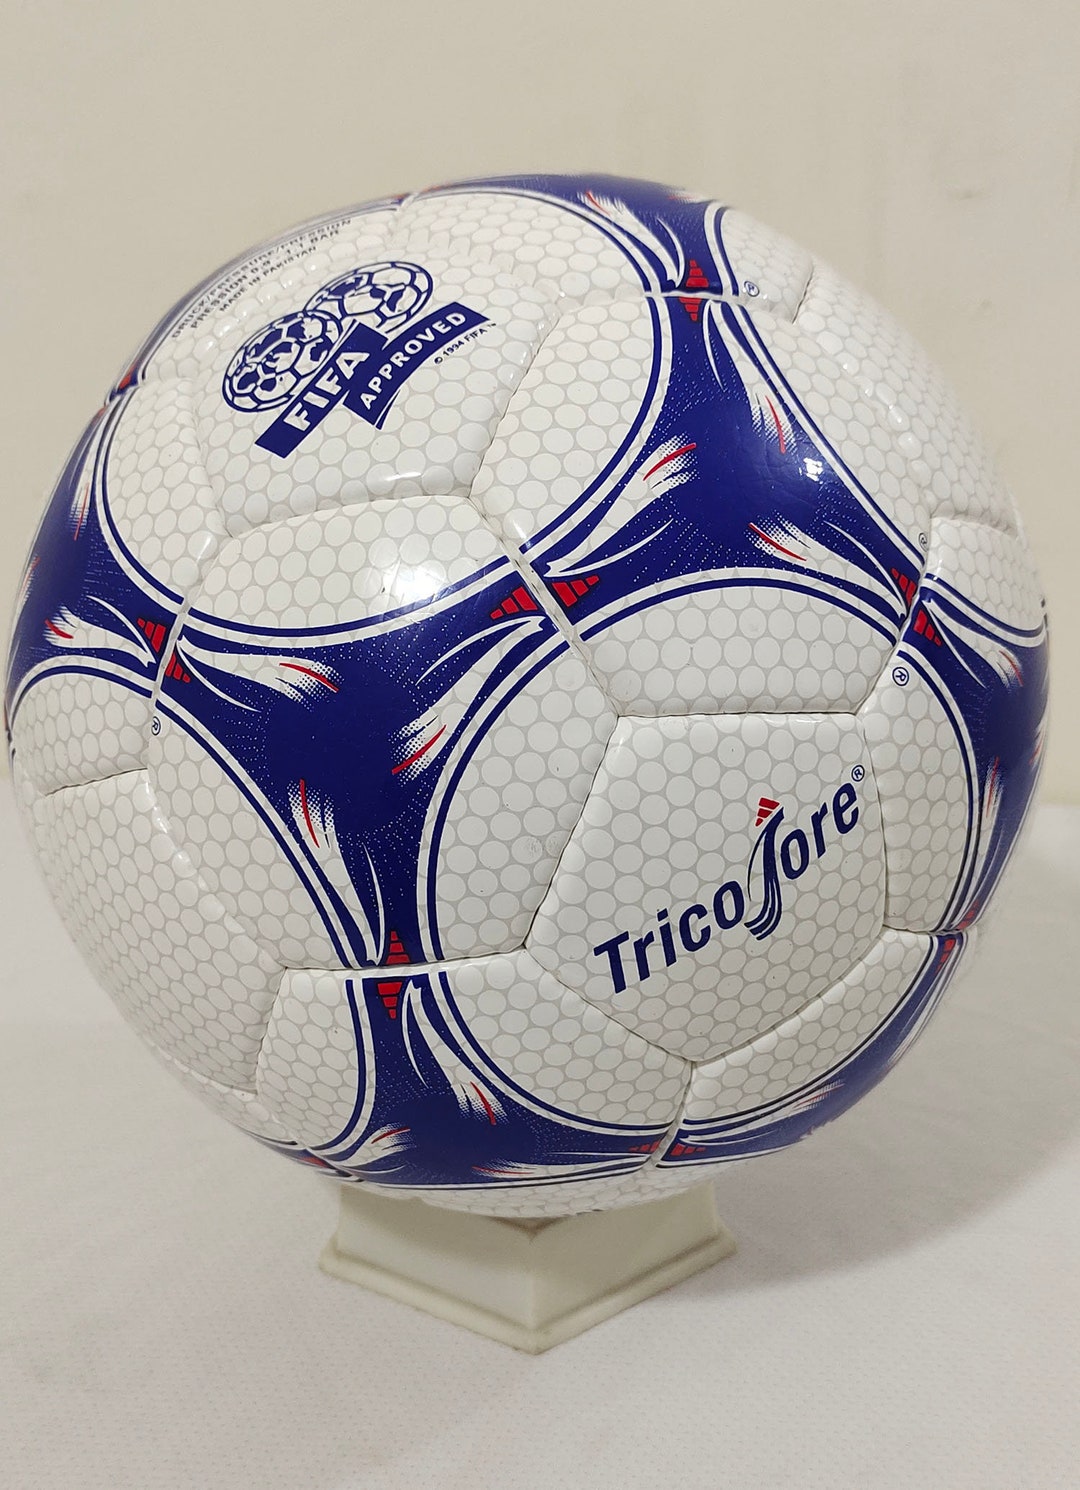 Official match ball of the fifa World Cup 1998 Tricolore 